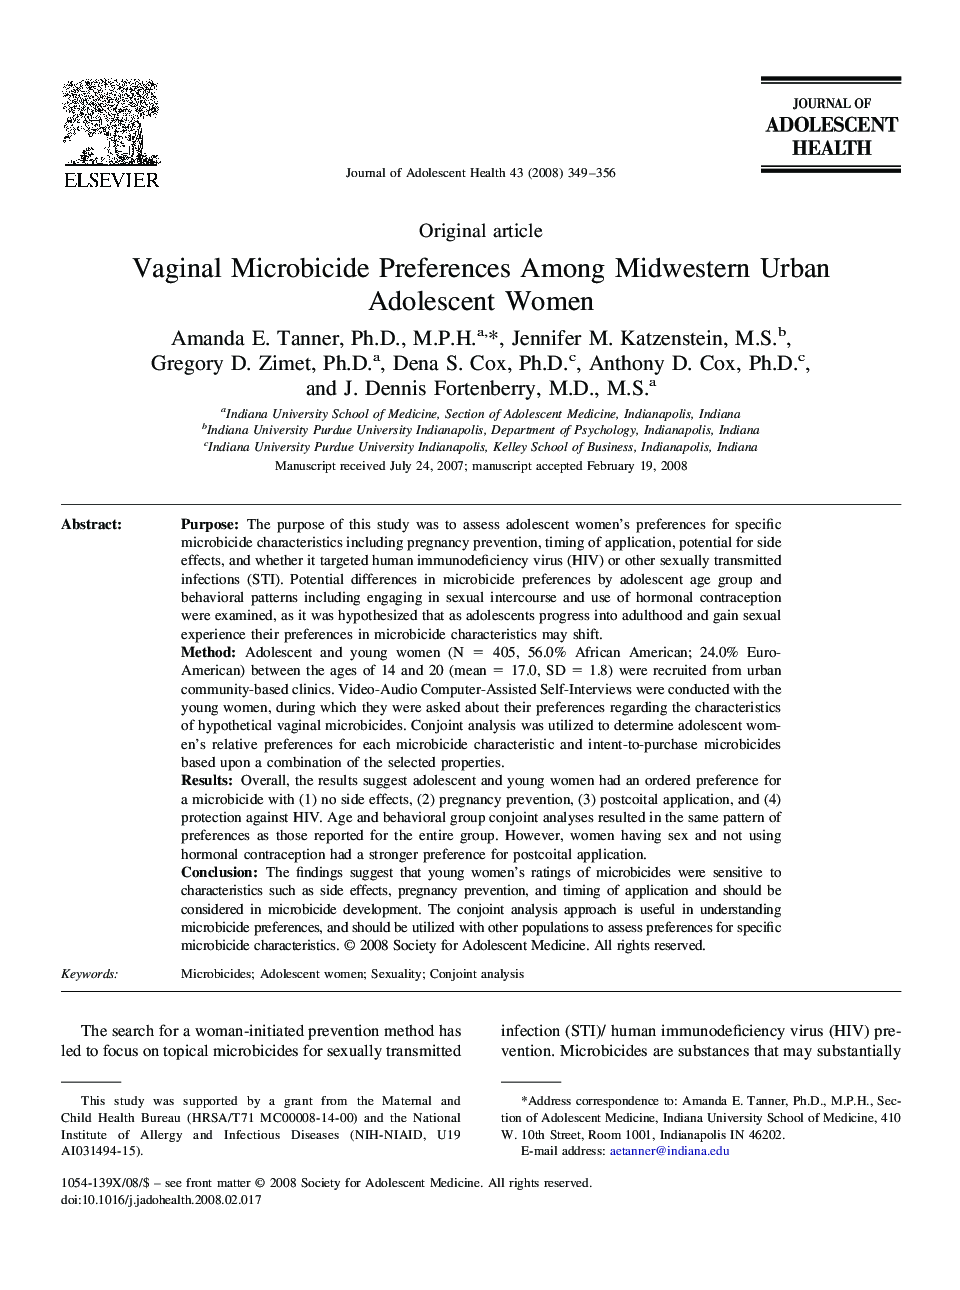 Vaginal Microbicide Preferences Among Midwestern Urban Adolescent Women 